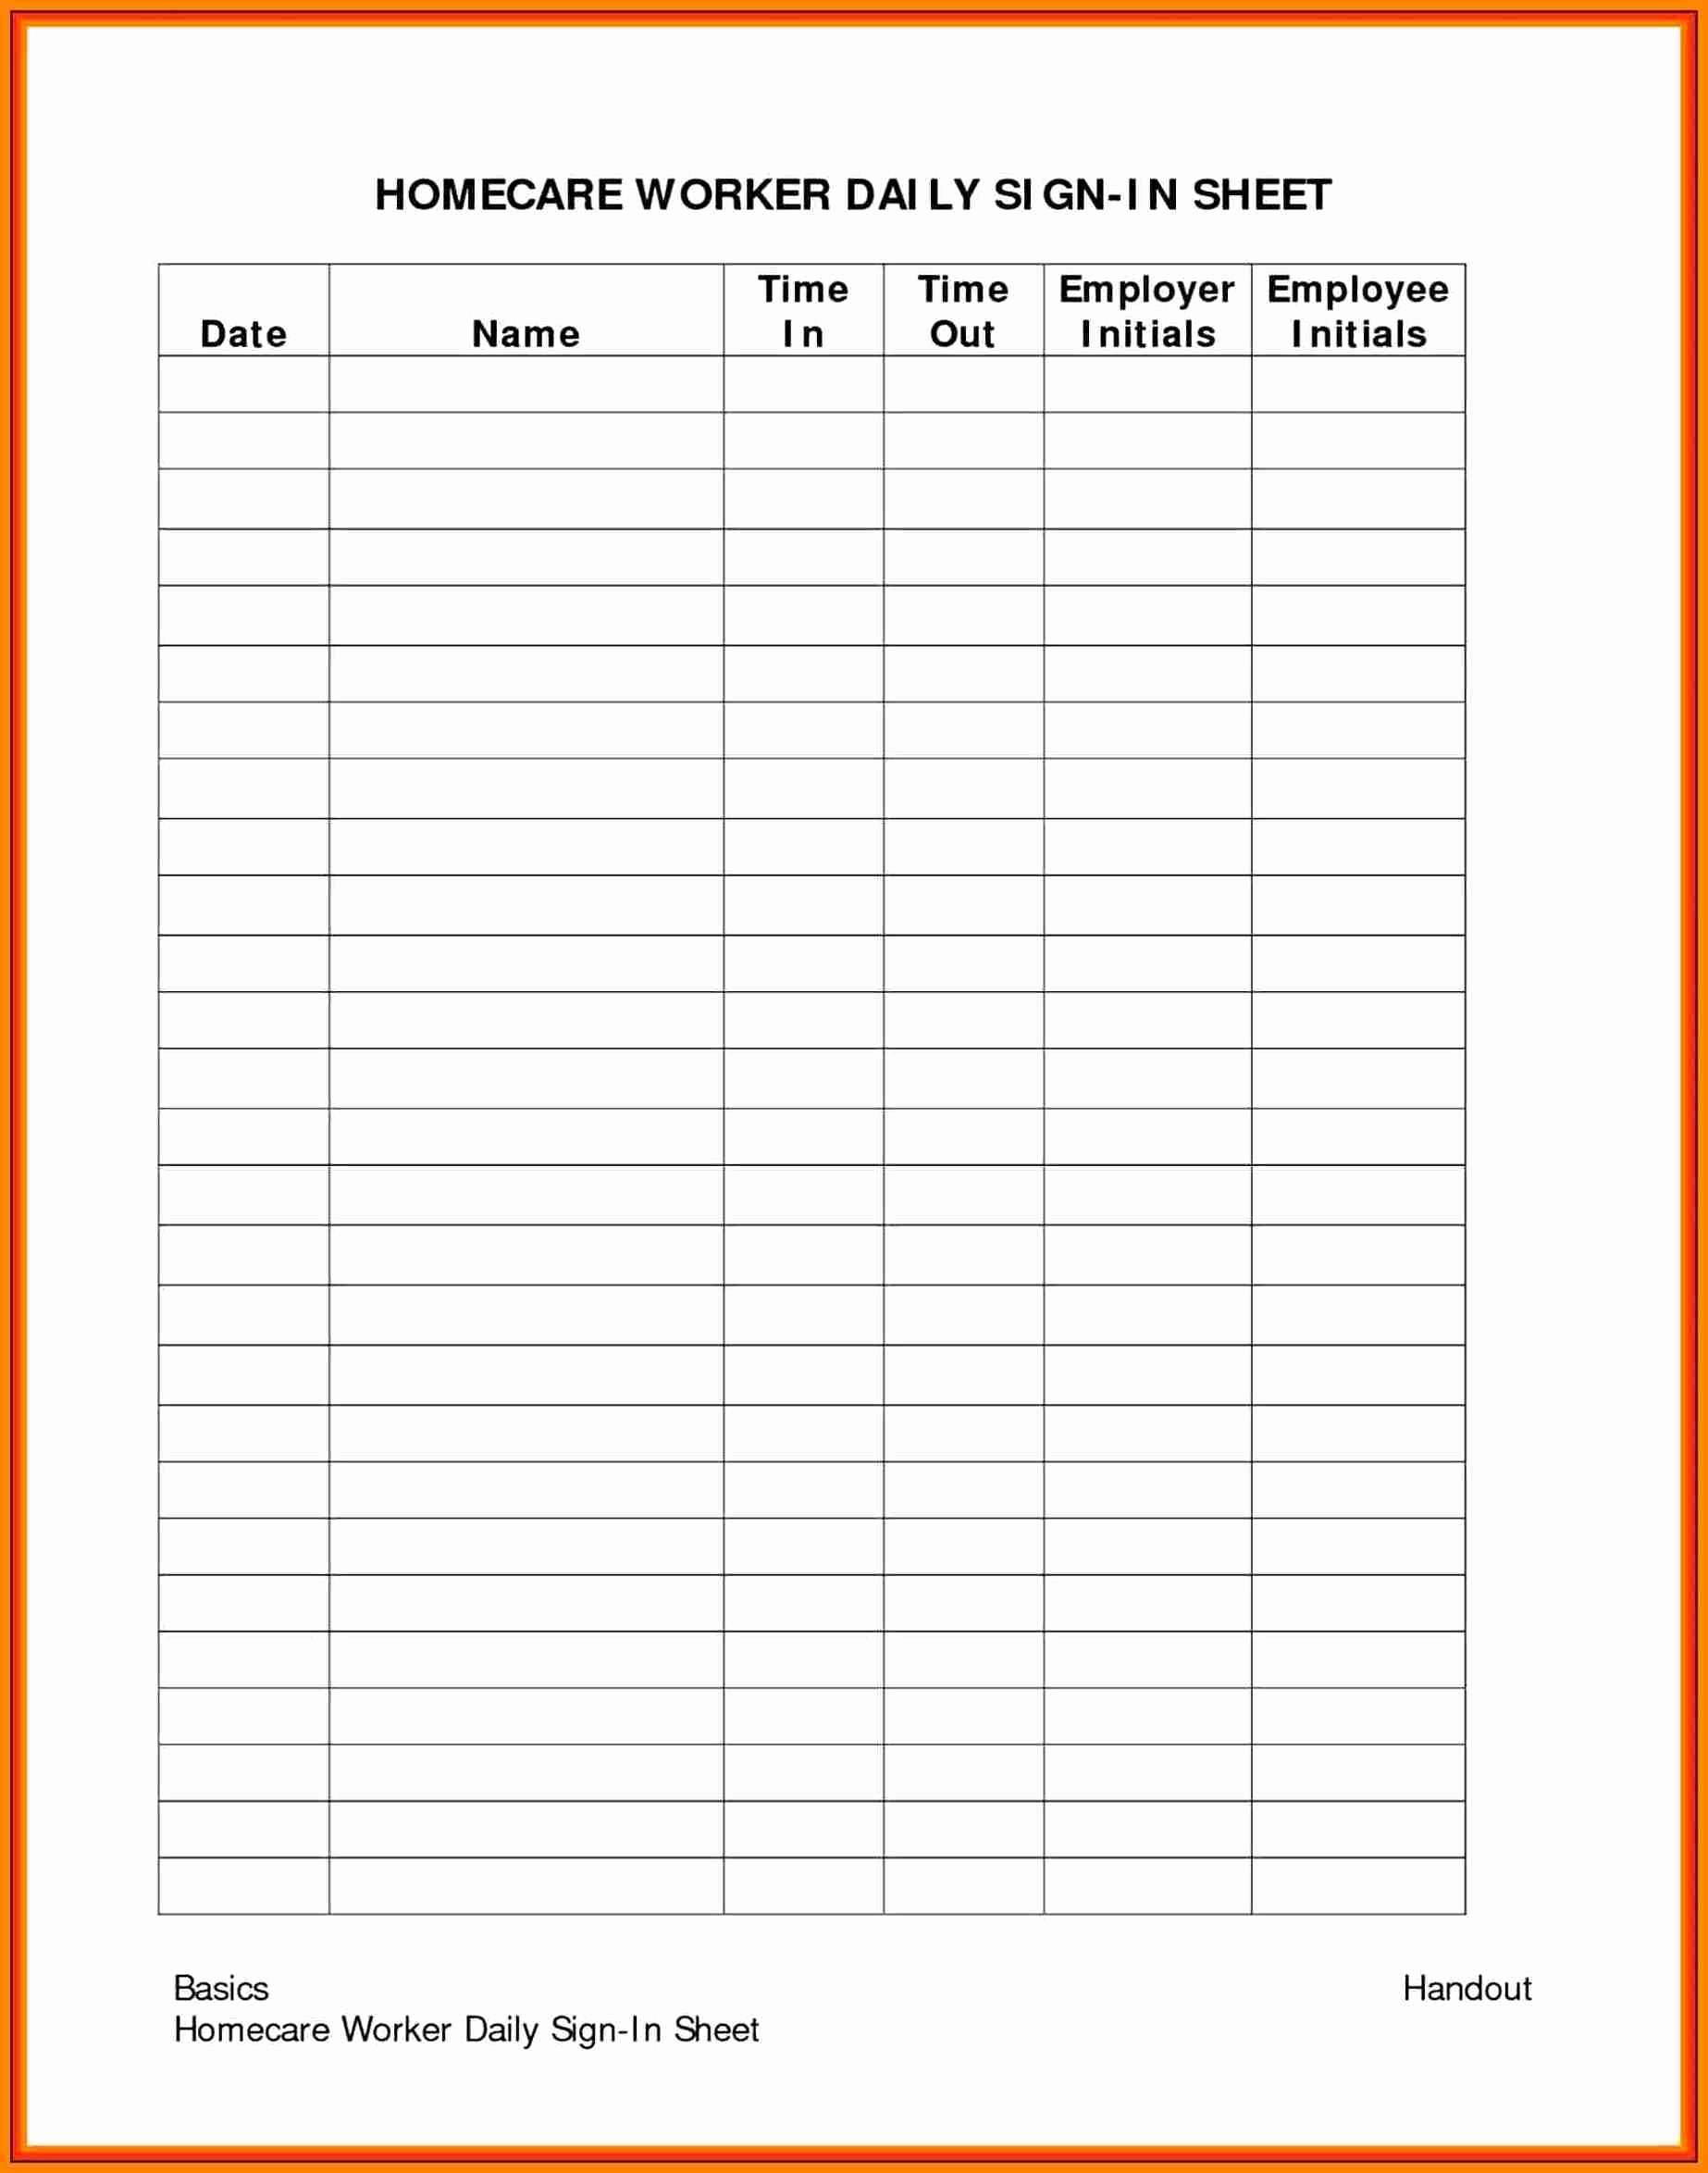 Free Individual Payroll Record form Awesome 10 Individual Payroll Record forms